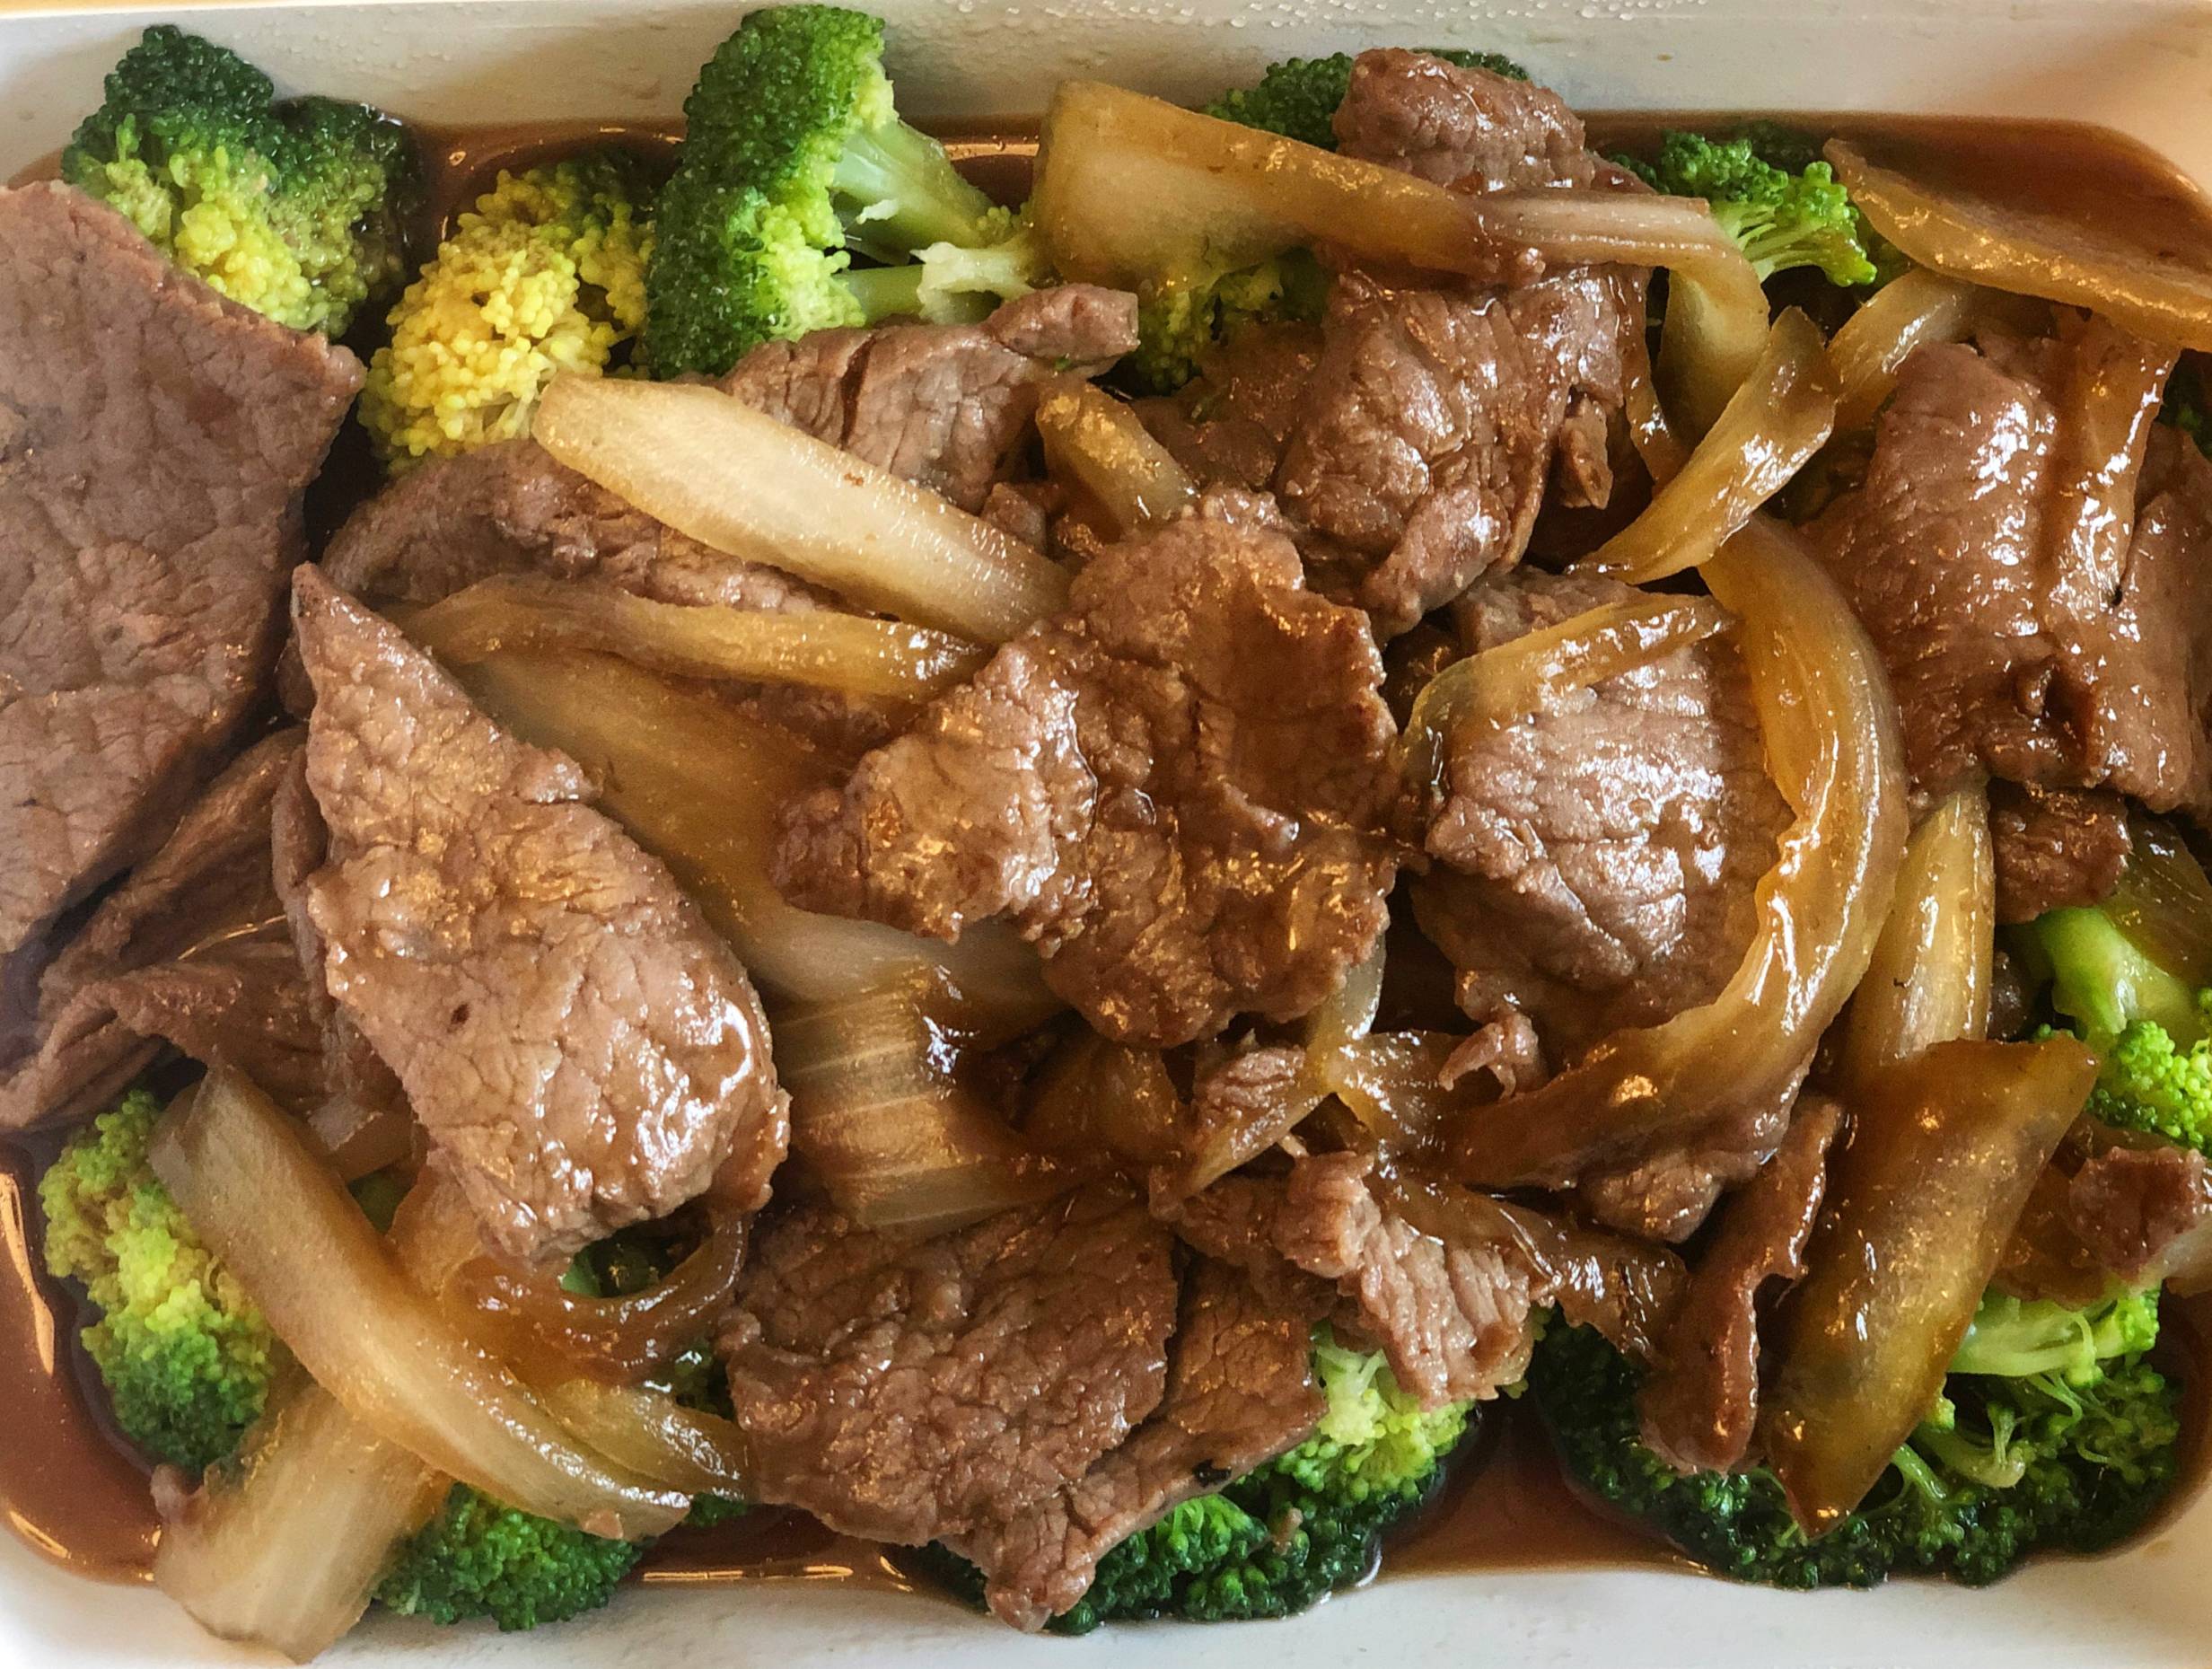 Large pieces of beef in a brown sauce with broccoli and onions are in a white plastic takeout container. This is an aerial shot. Photo by Alyssa Buckley.